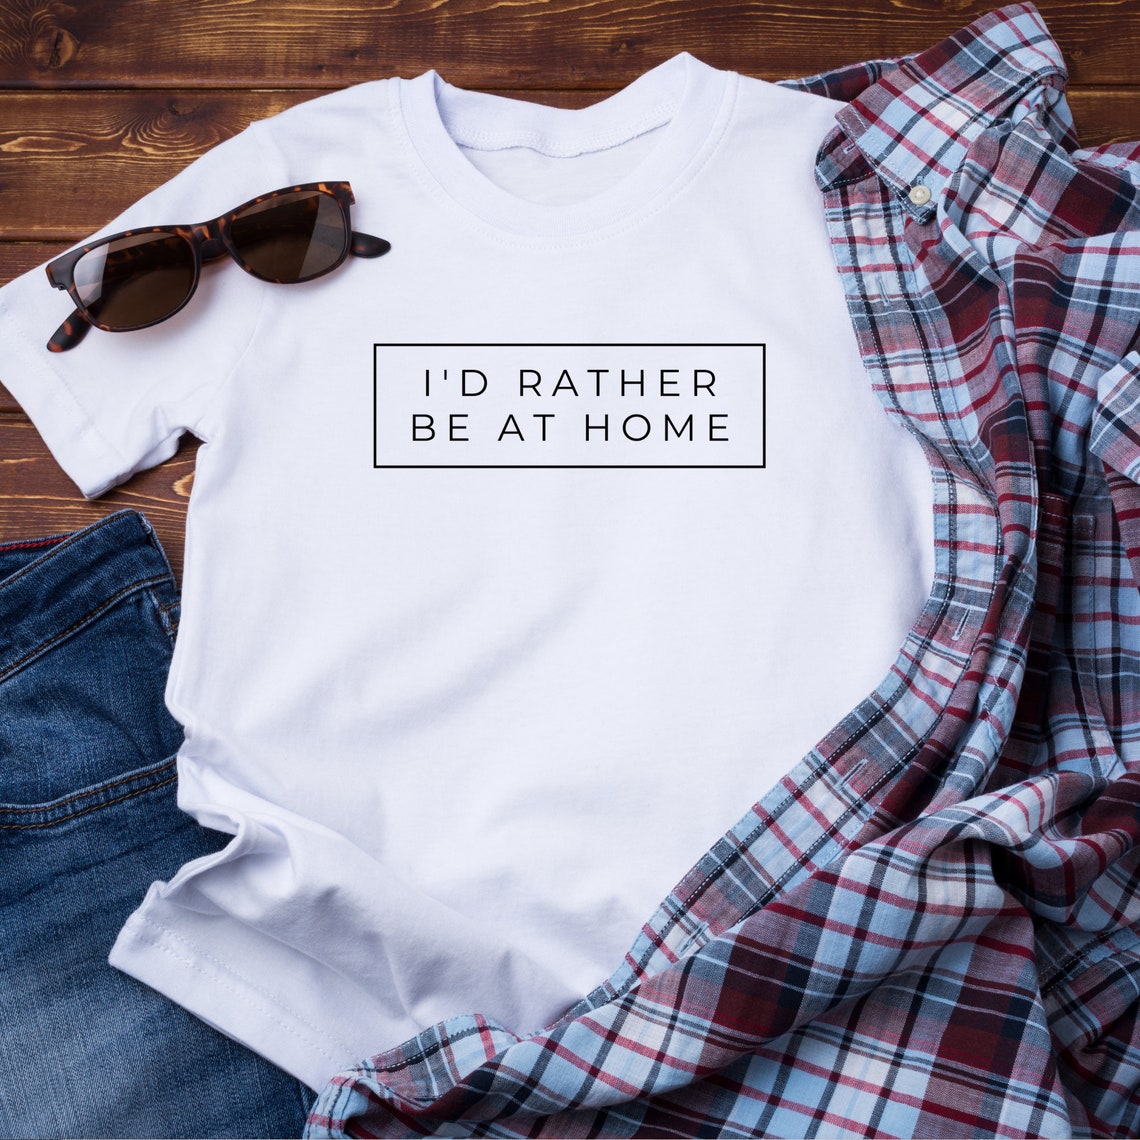 I'd Rather Be at Home - Etsy